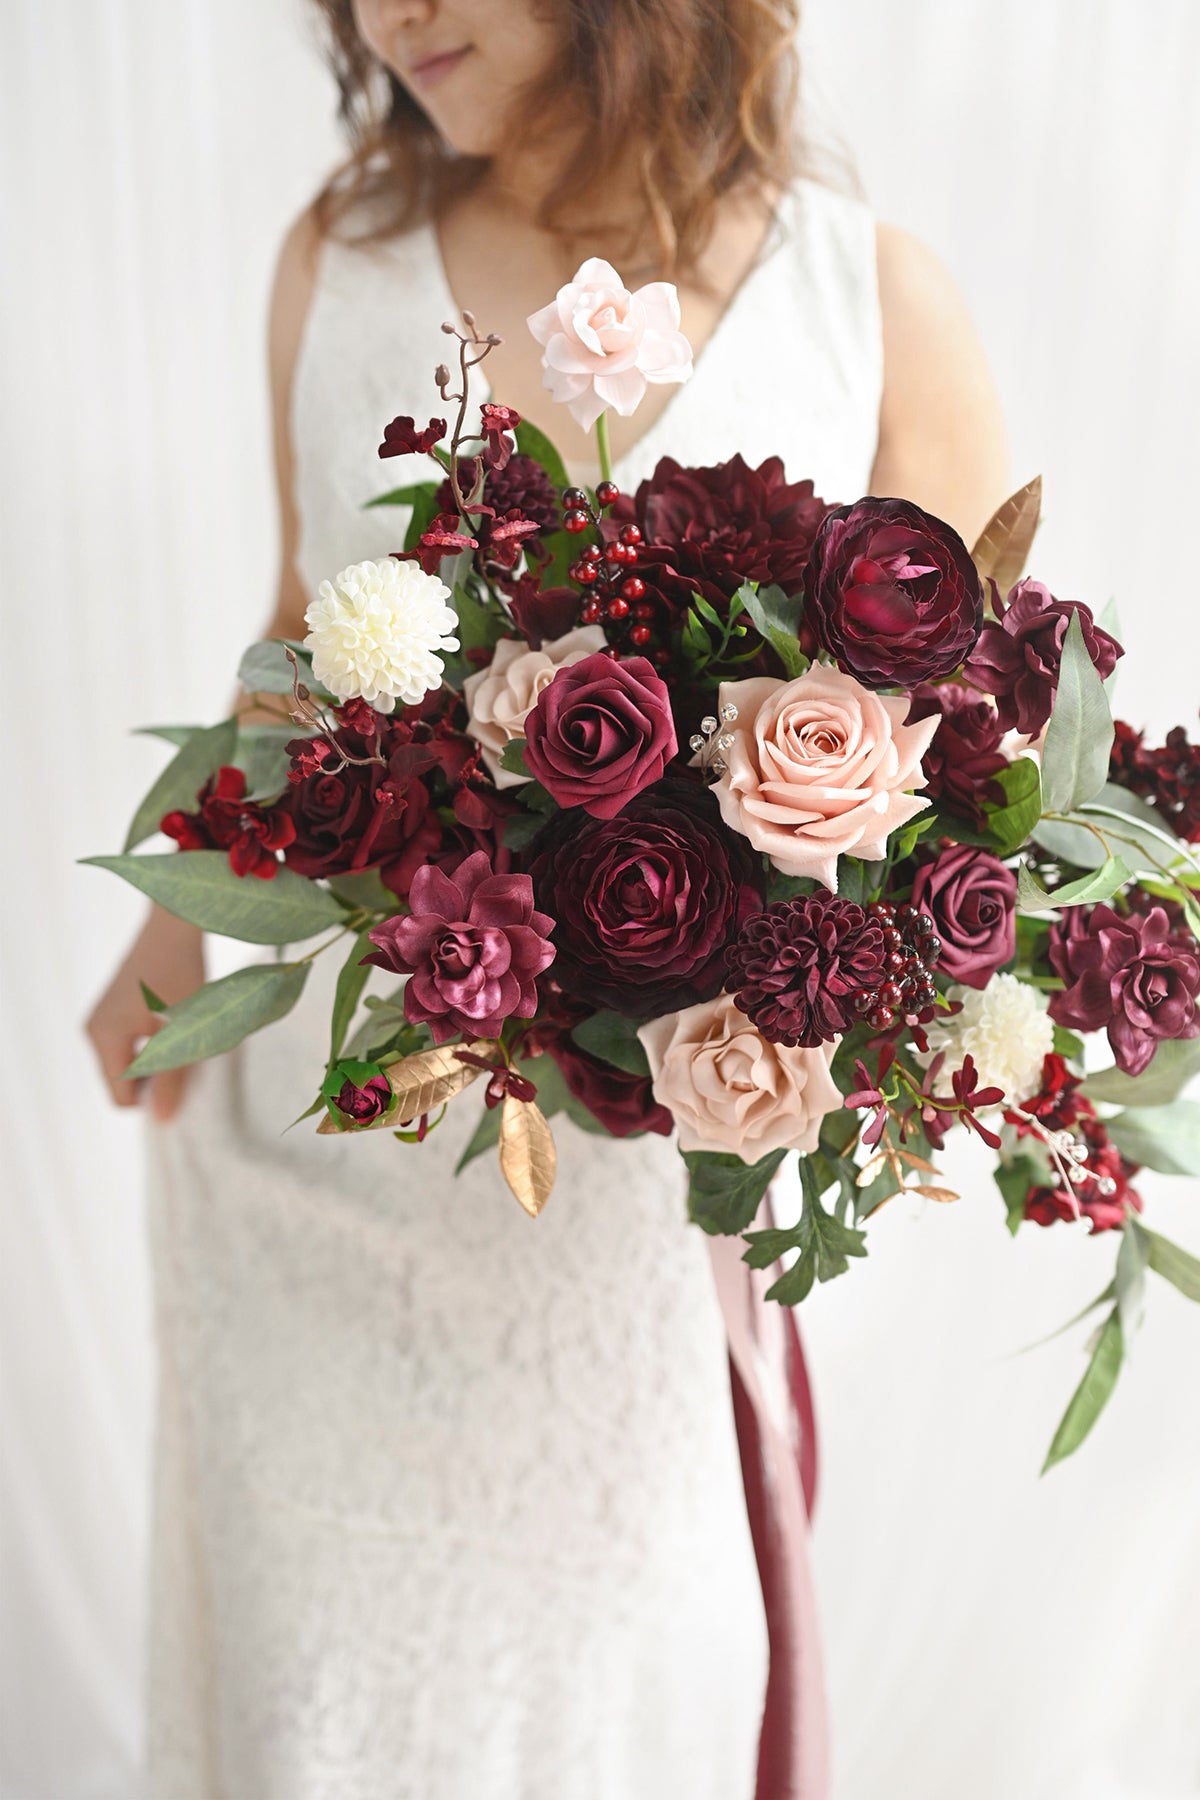 Large Free-Form Bridal Bouquet in Romantic Marsala